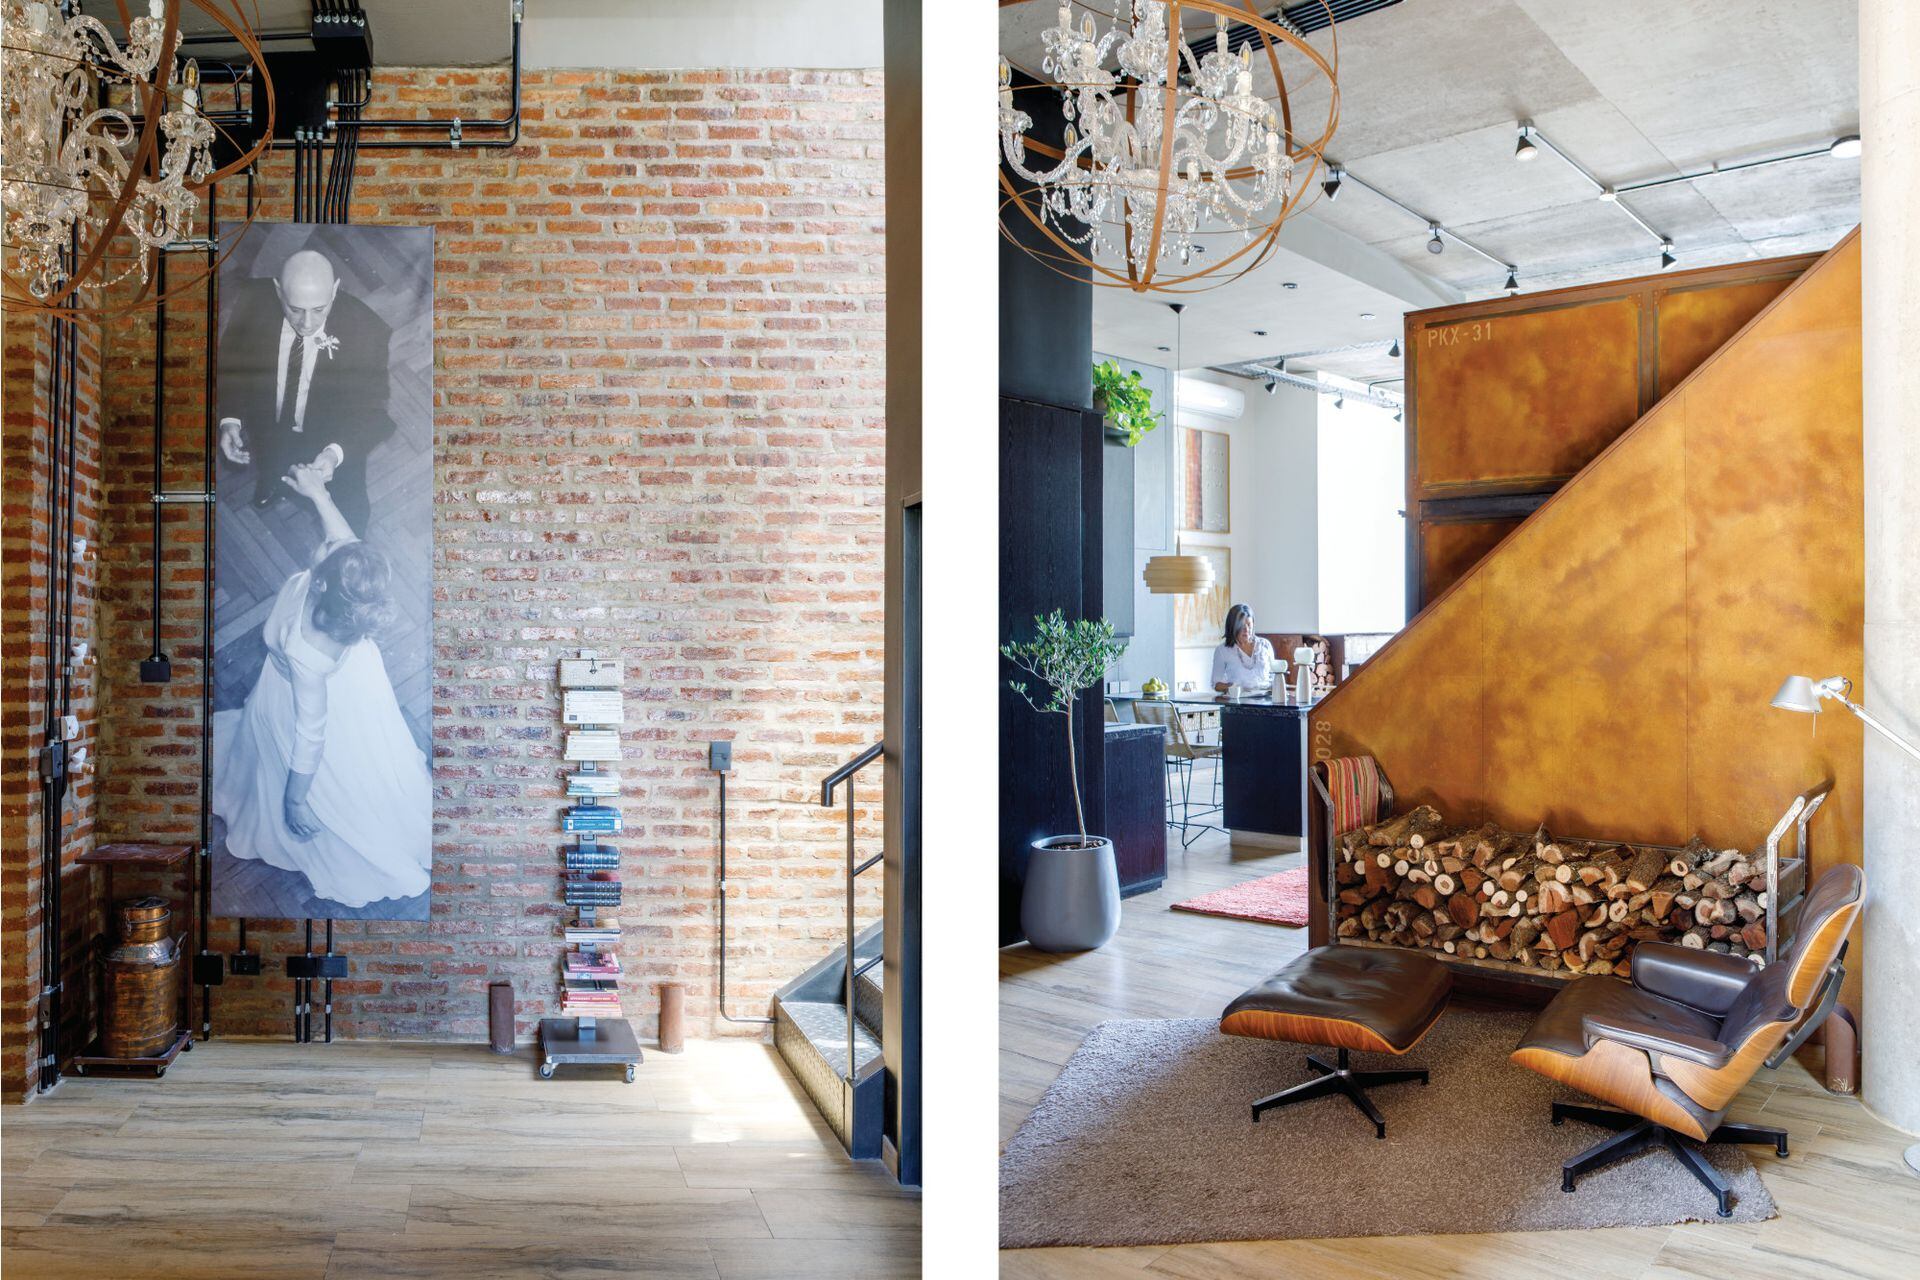 Right: In addition to welcoming, the gigantography hides the board and the light pipes.  Left: Wood-like porcelain tile floor (Barugel), 'Alexa' rug (El Espartano), 'Eames Lounge' armchair and footrest (Herman Miller) and wood cart (Binomio Arquitectura & Diseño).  The fringe chandelier (Mercado Libre) was intervened by the owners with iron rings.  Pot and olive tree (Nature City).